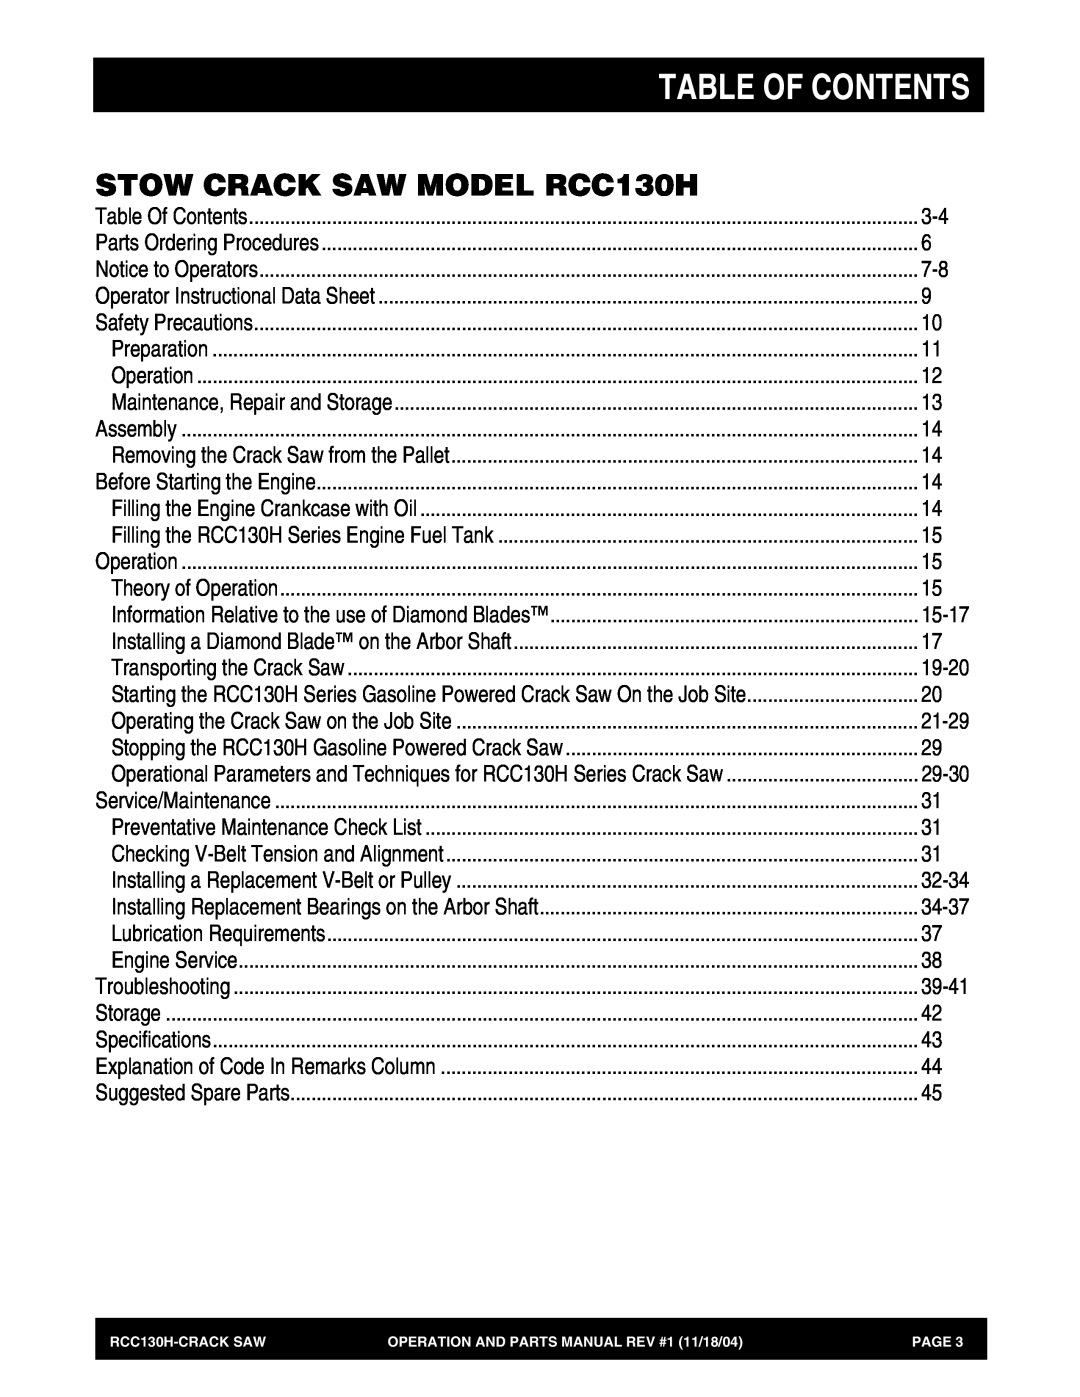 Stow manual Table Of Contents, STOW CRACK SAW MODEL RCC130H 